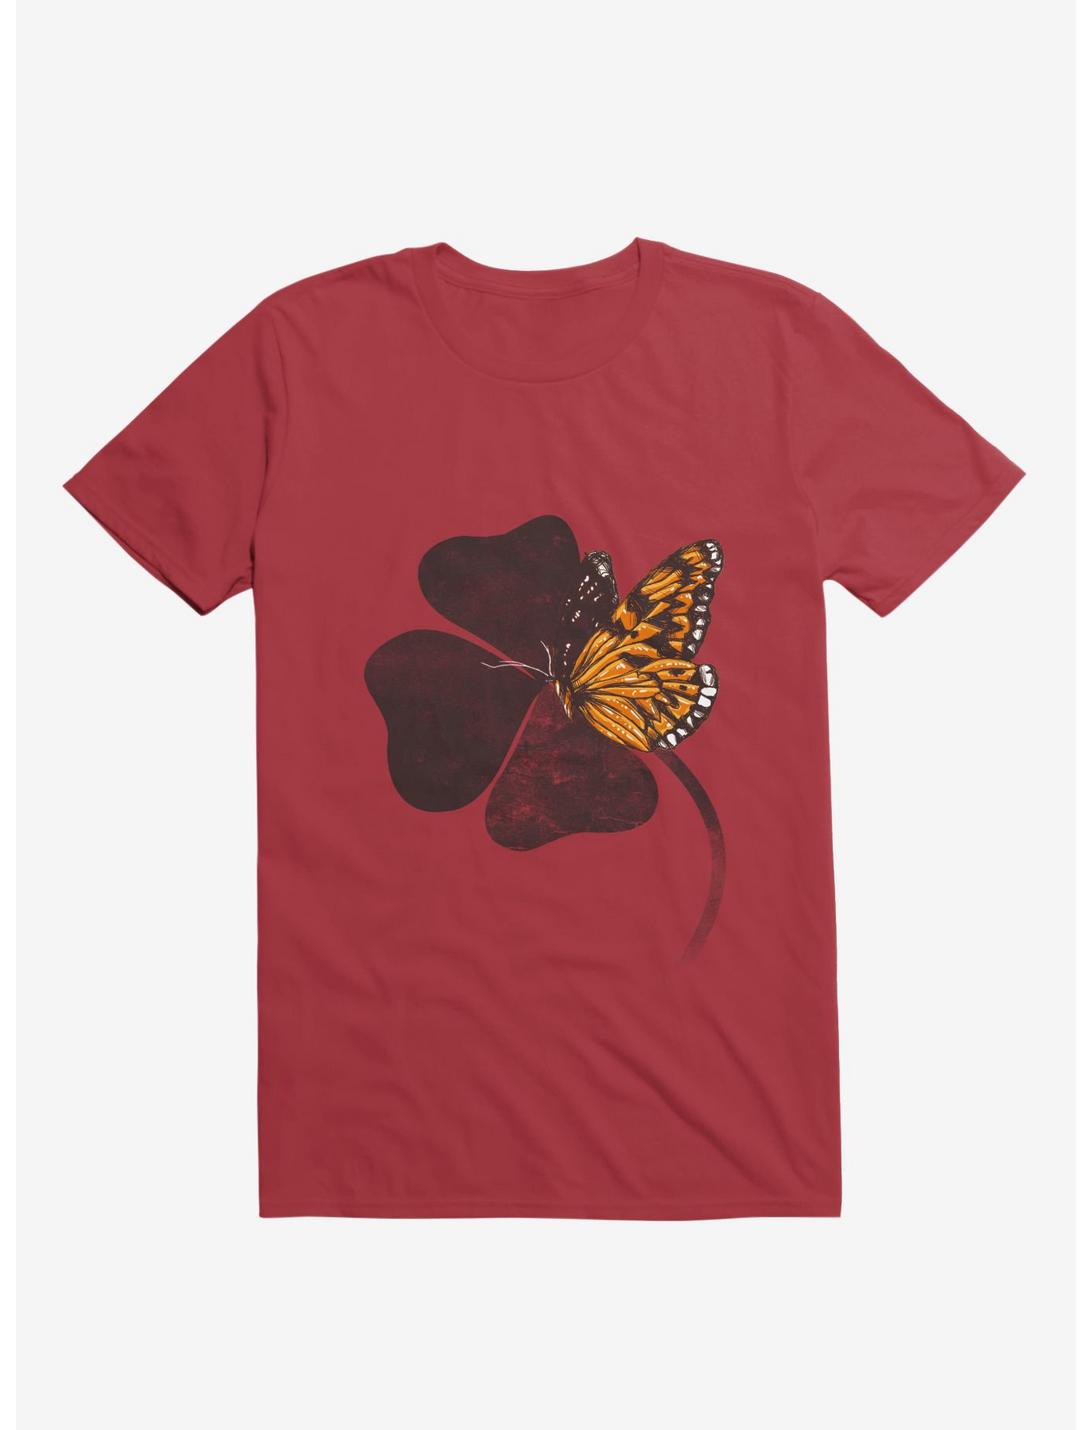 By Chance T-Shirt, RED, hi-res